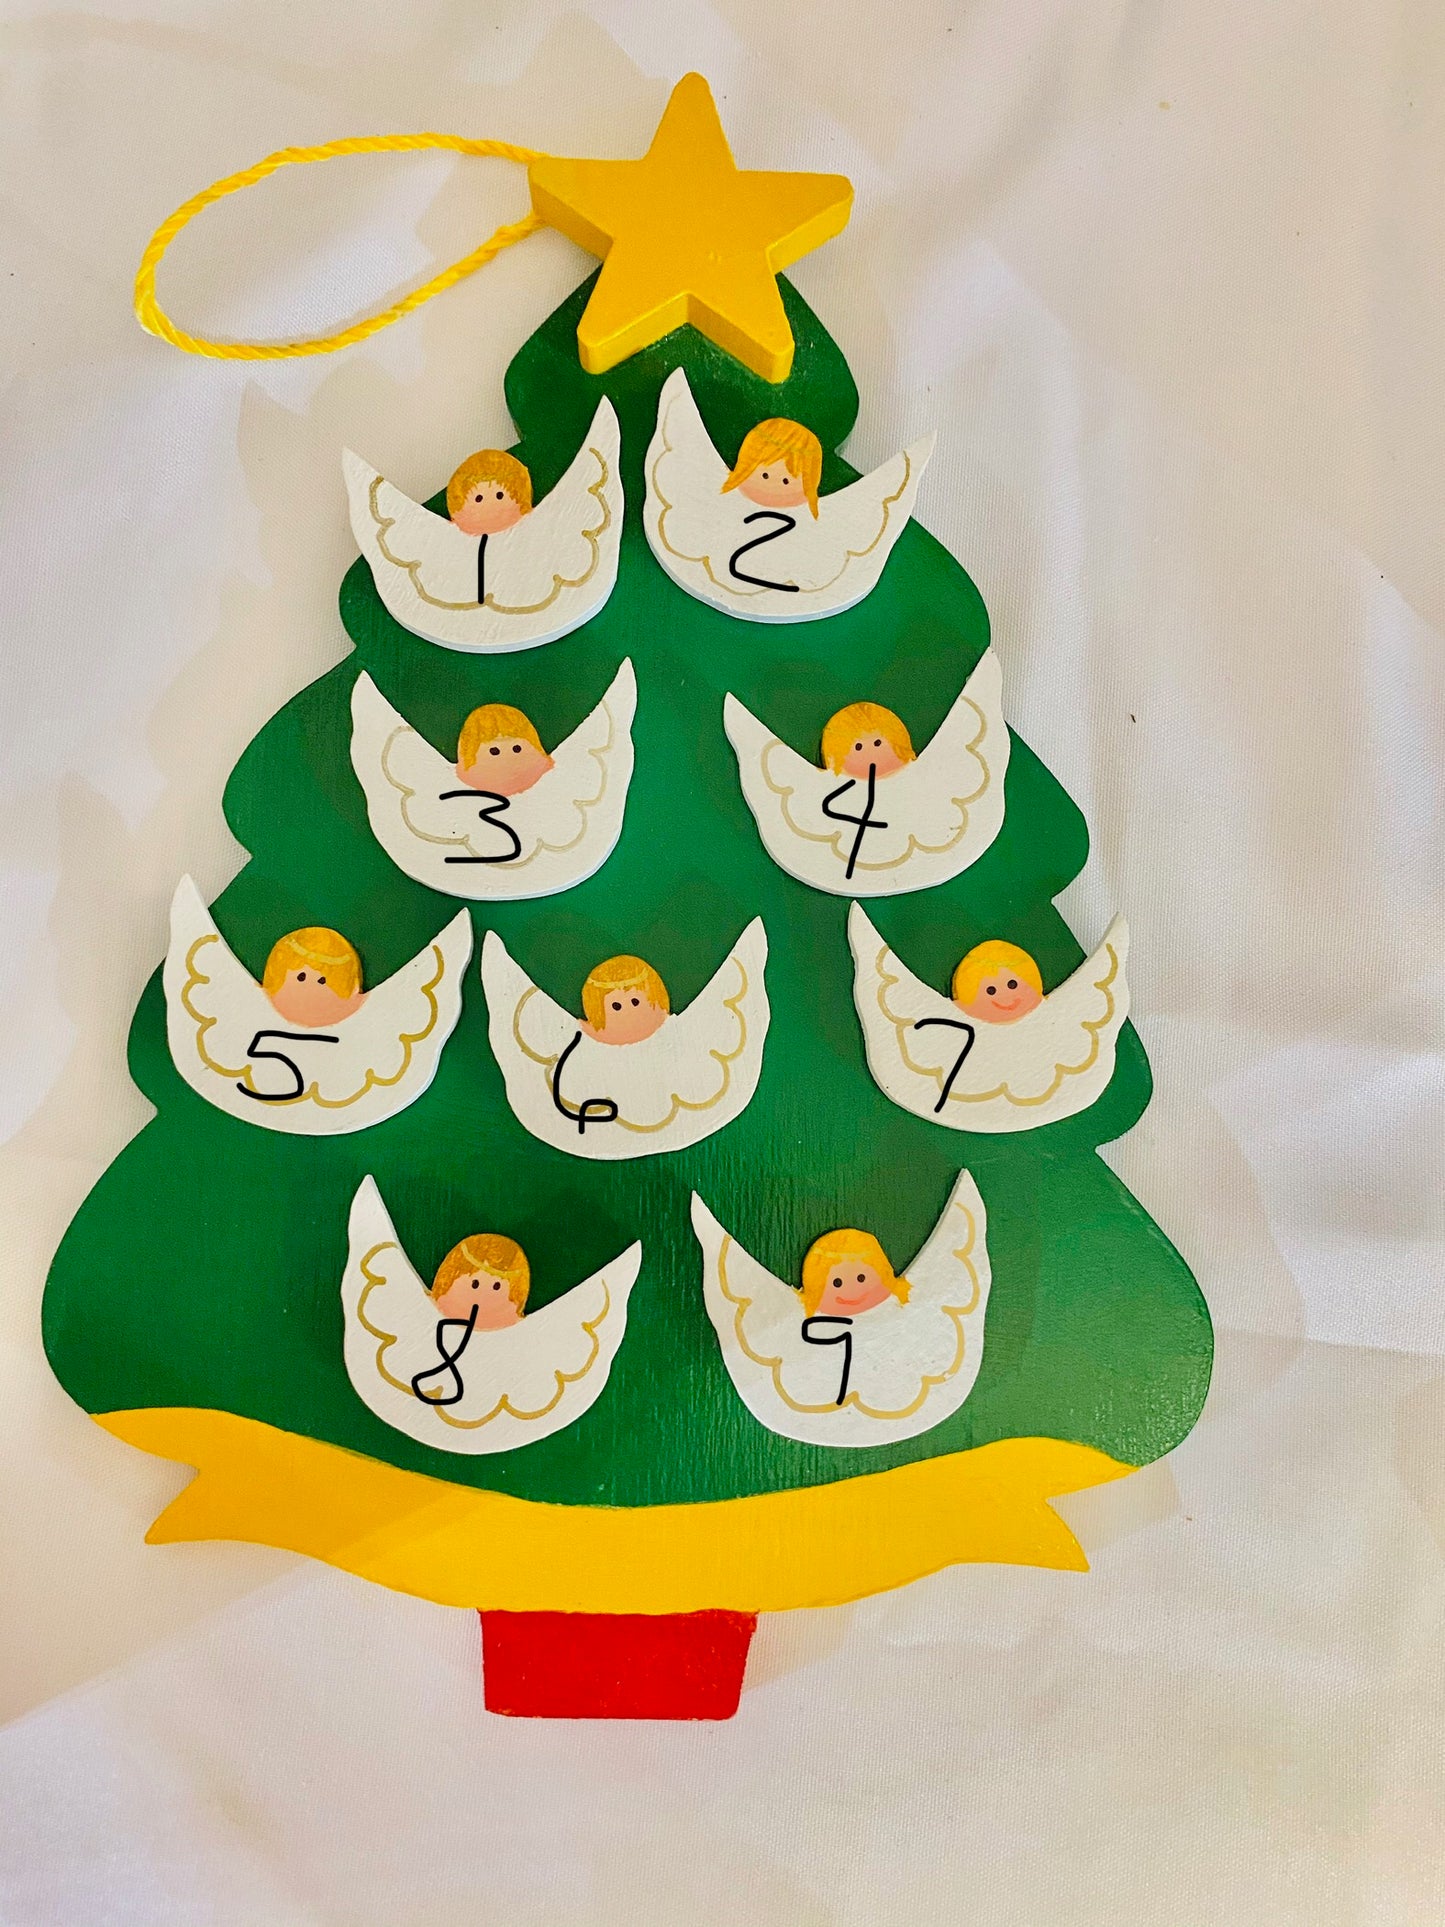 Personalized Ornament 9 Angels on a Christmas Tree  7.5" X 6"